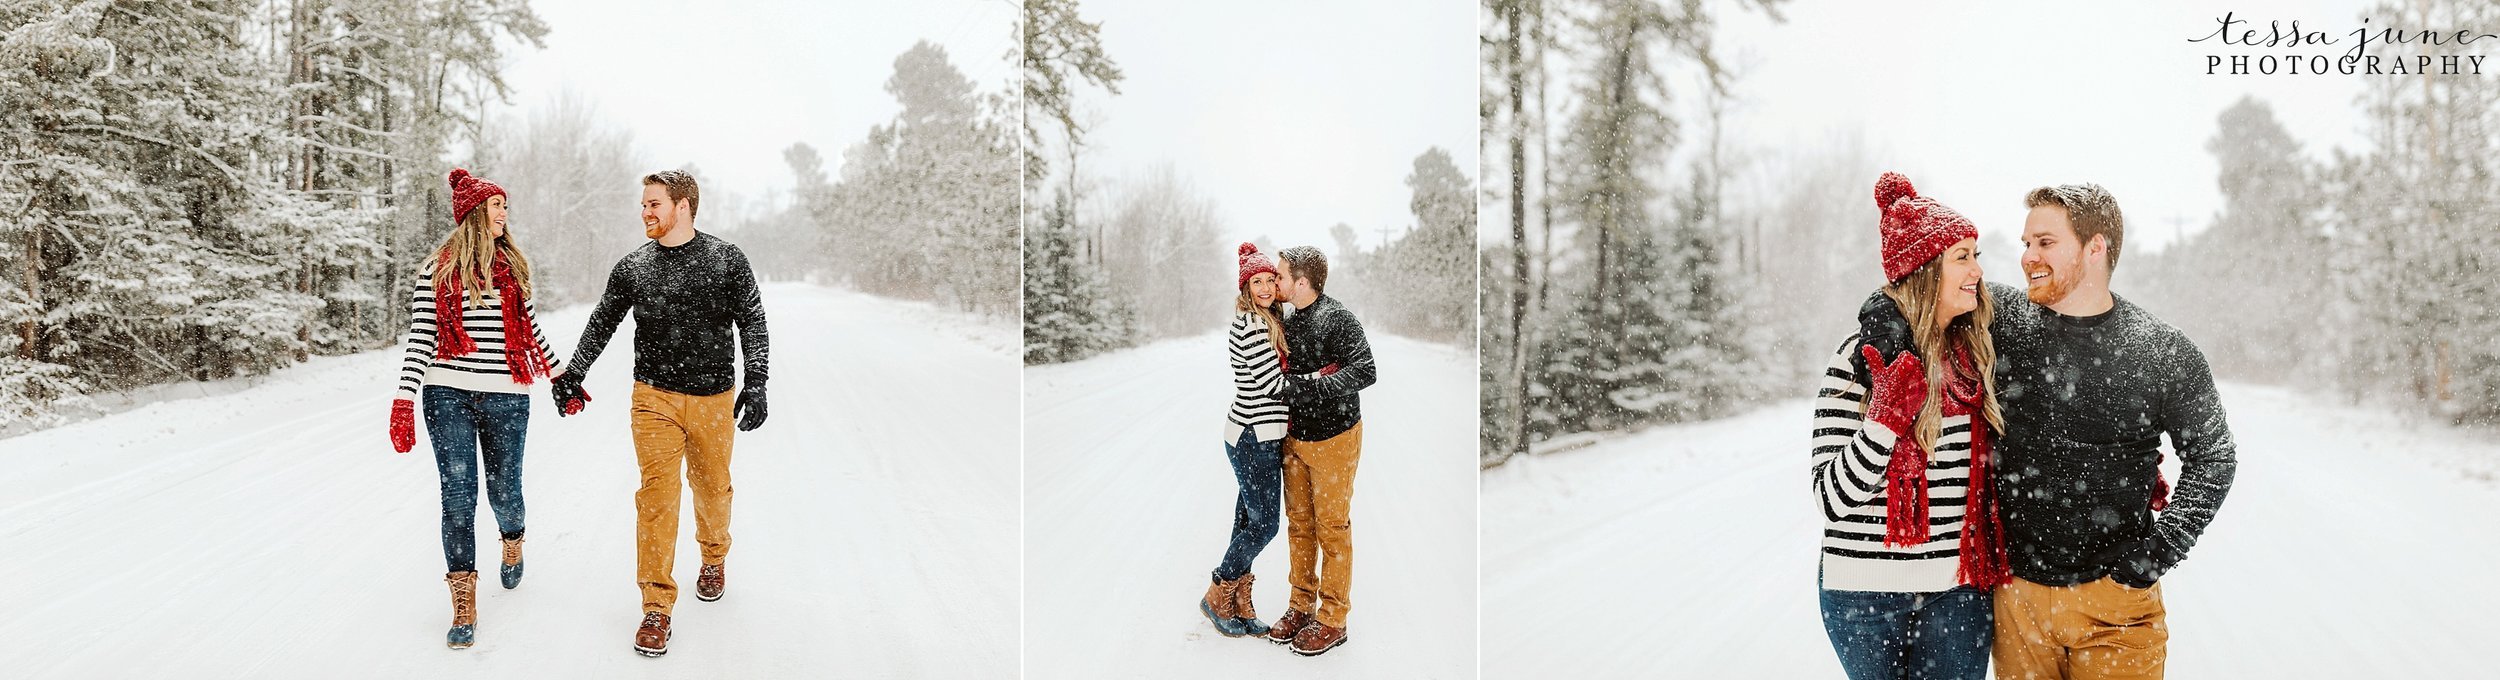 duluth-winter-engagement-forest-photos-during-snow-storm-42.jpg